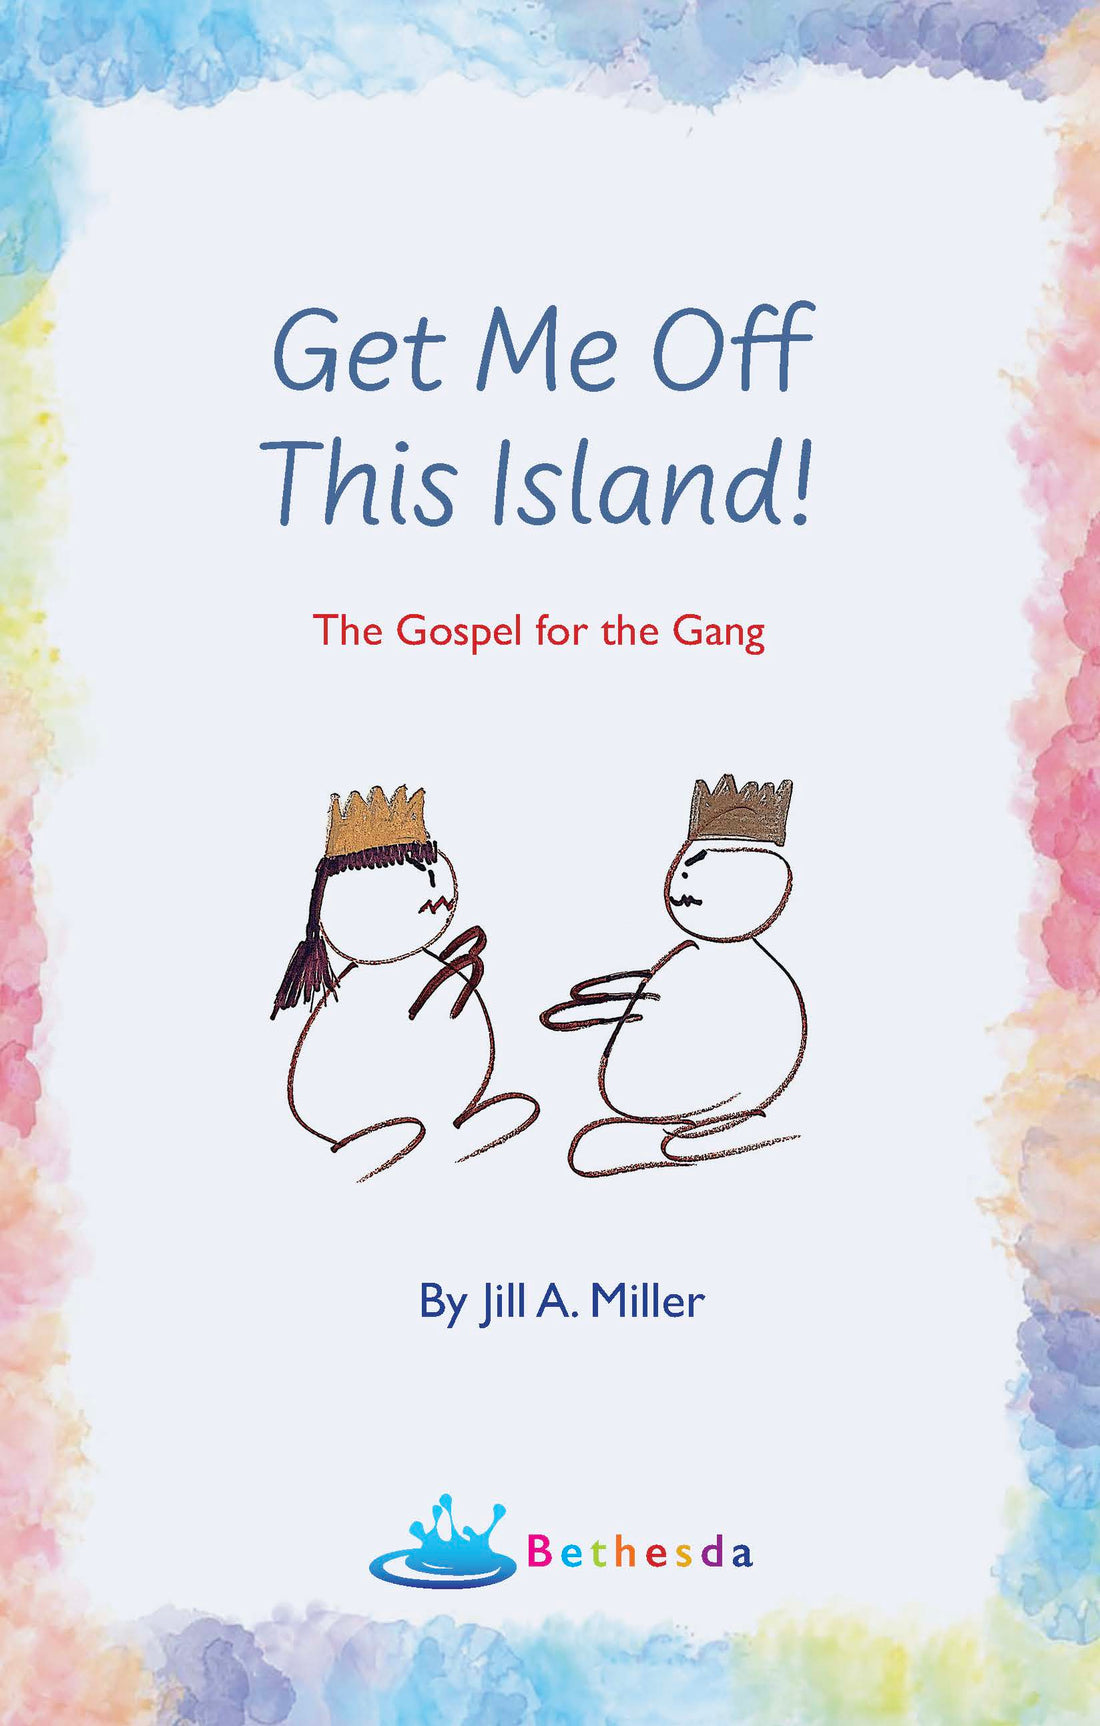 Get Me Off This Island! The Gospel for the Gang